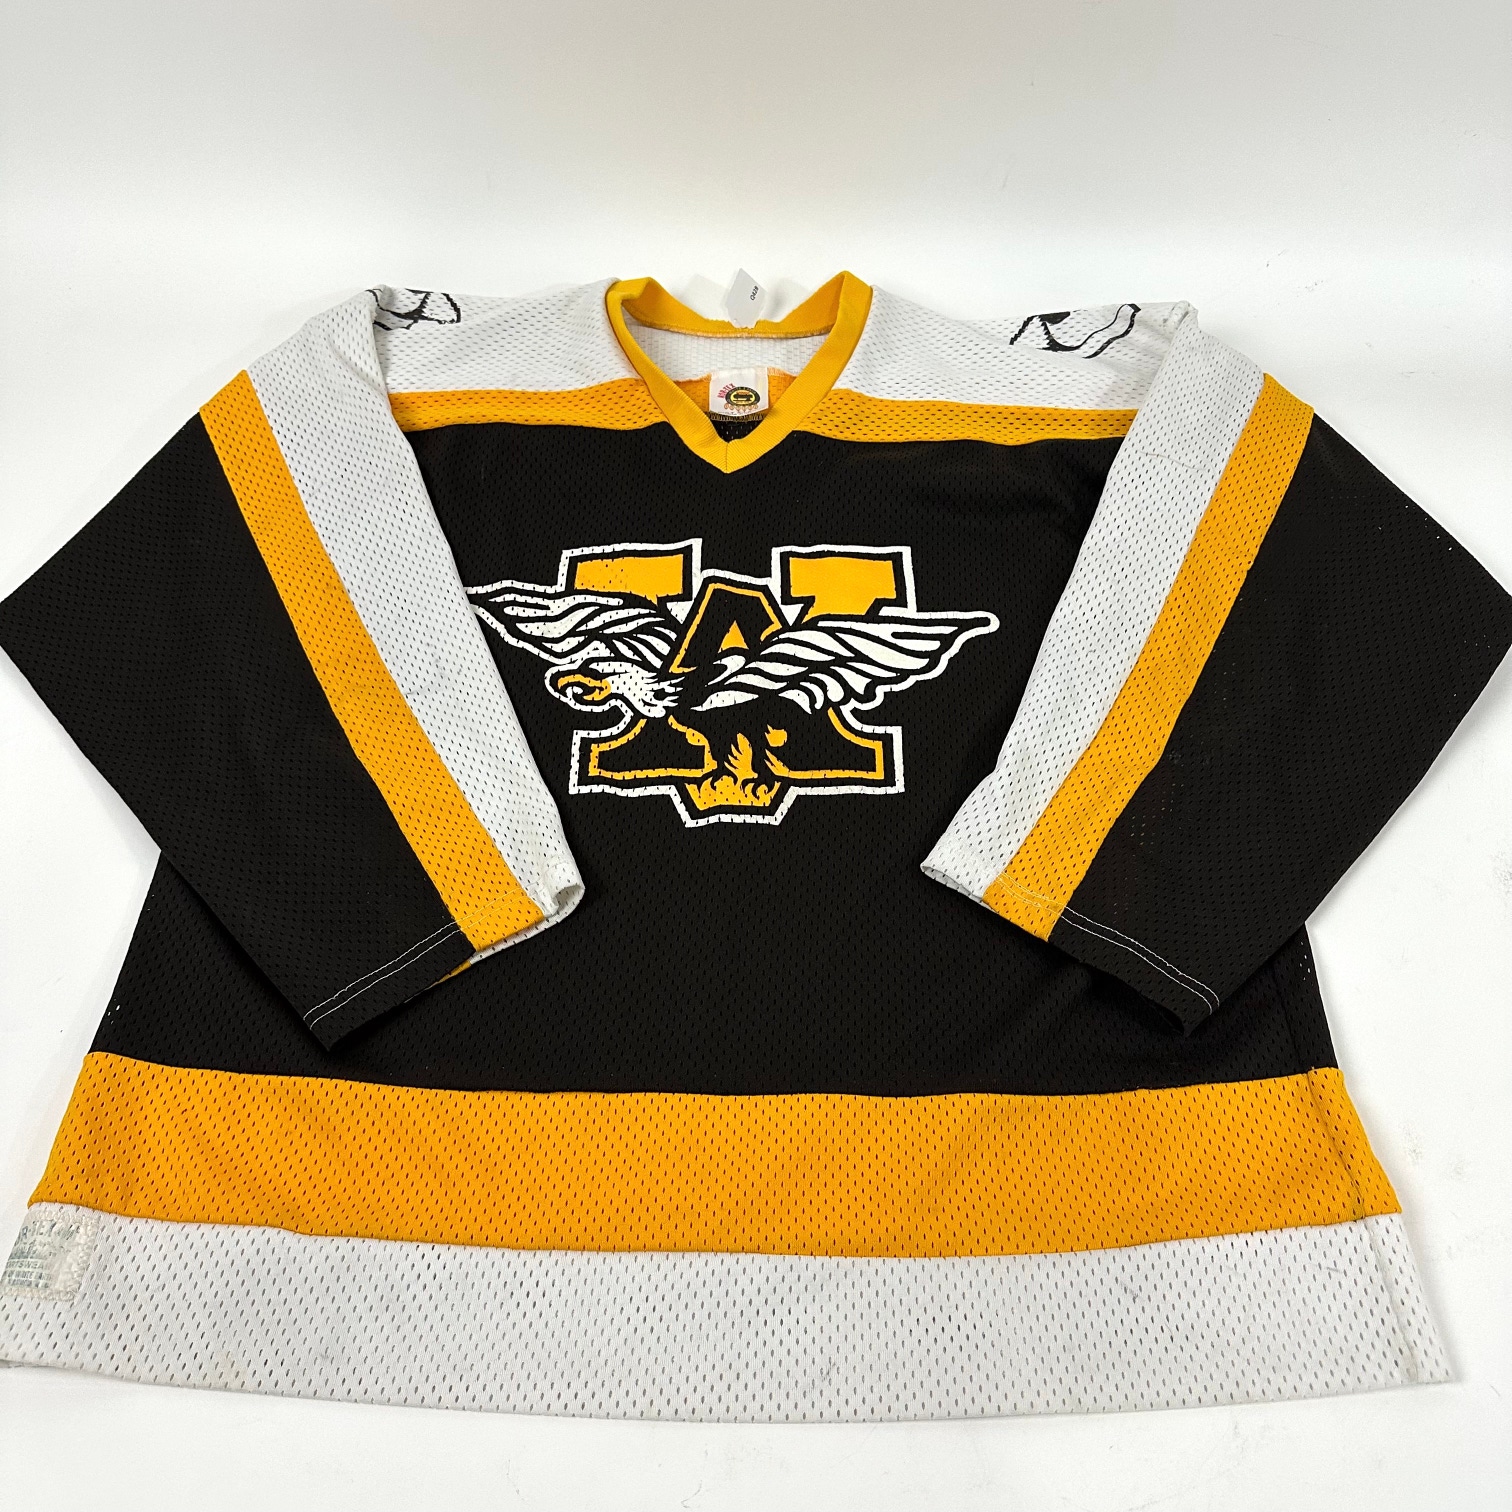 Used Brown and Yellow Mesh Practice Jersey | Senior XL | Q428